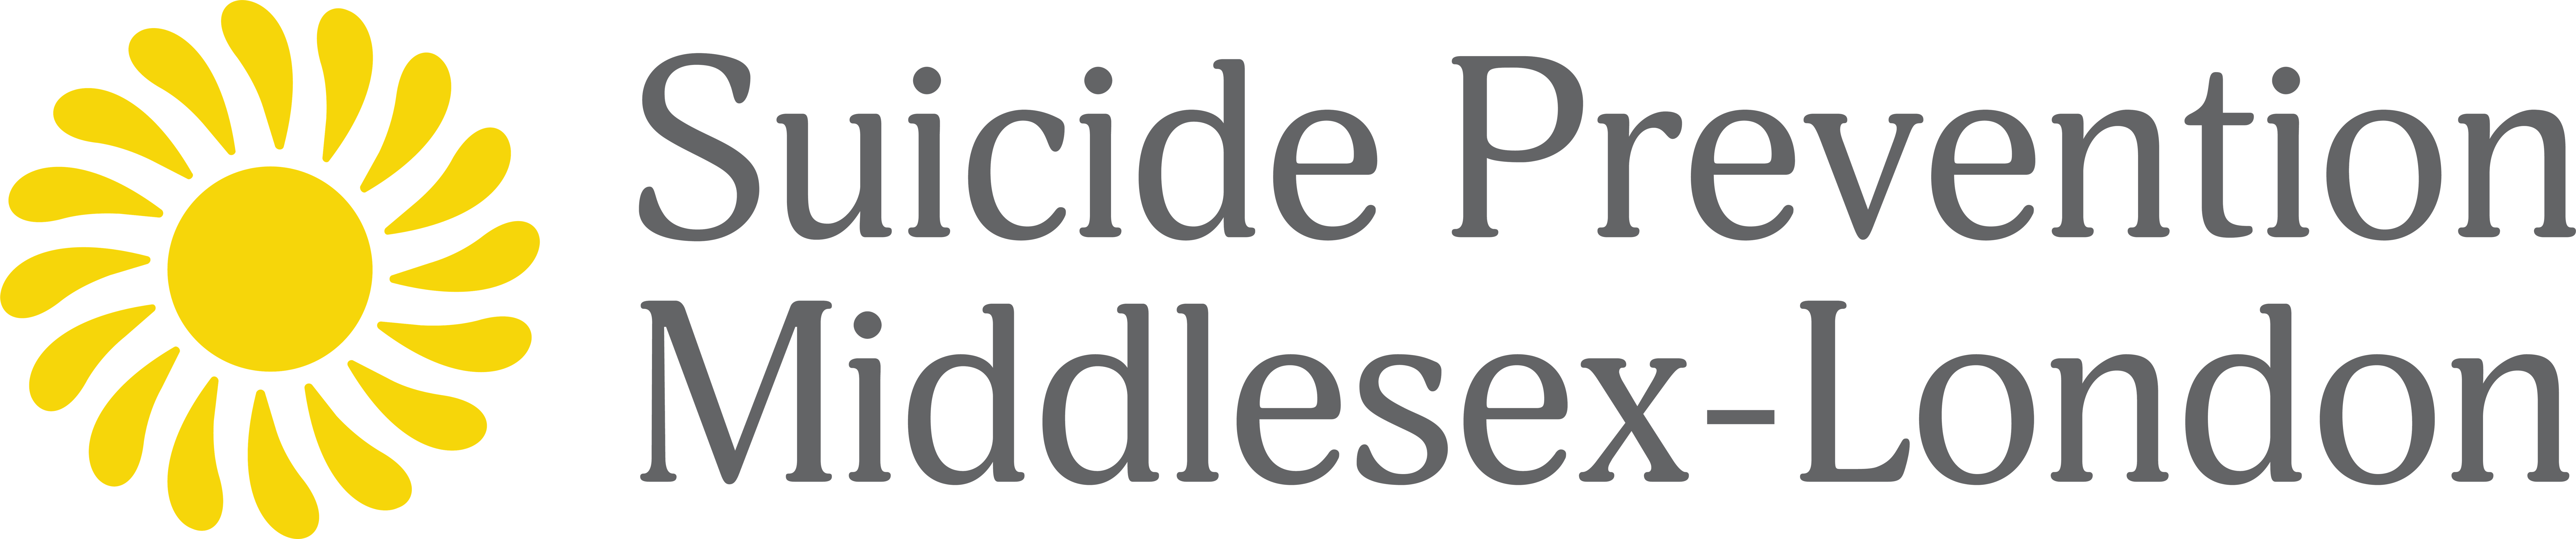 Suicide Prevention Middlesex-London